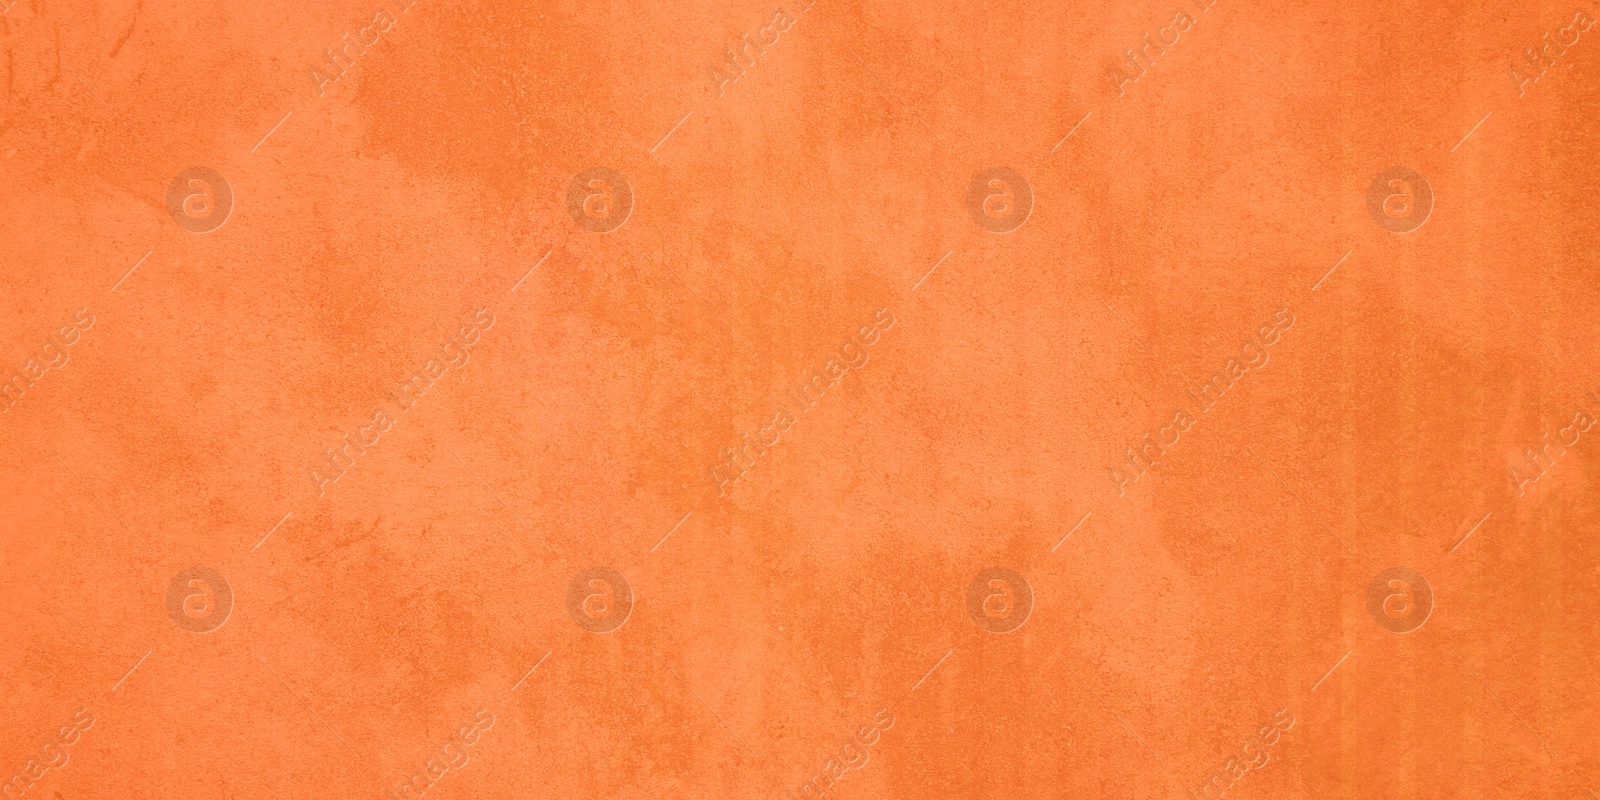 Image of Texture of concrete surface painted in orange color as background